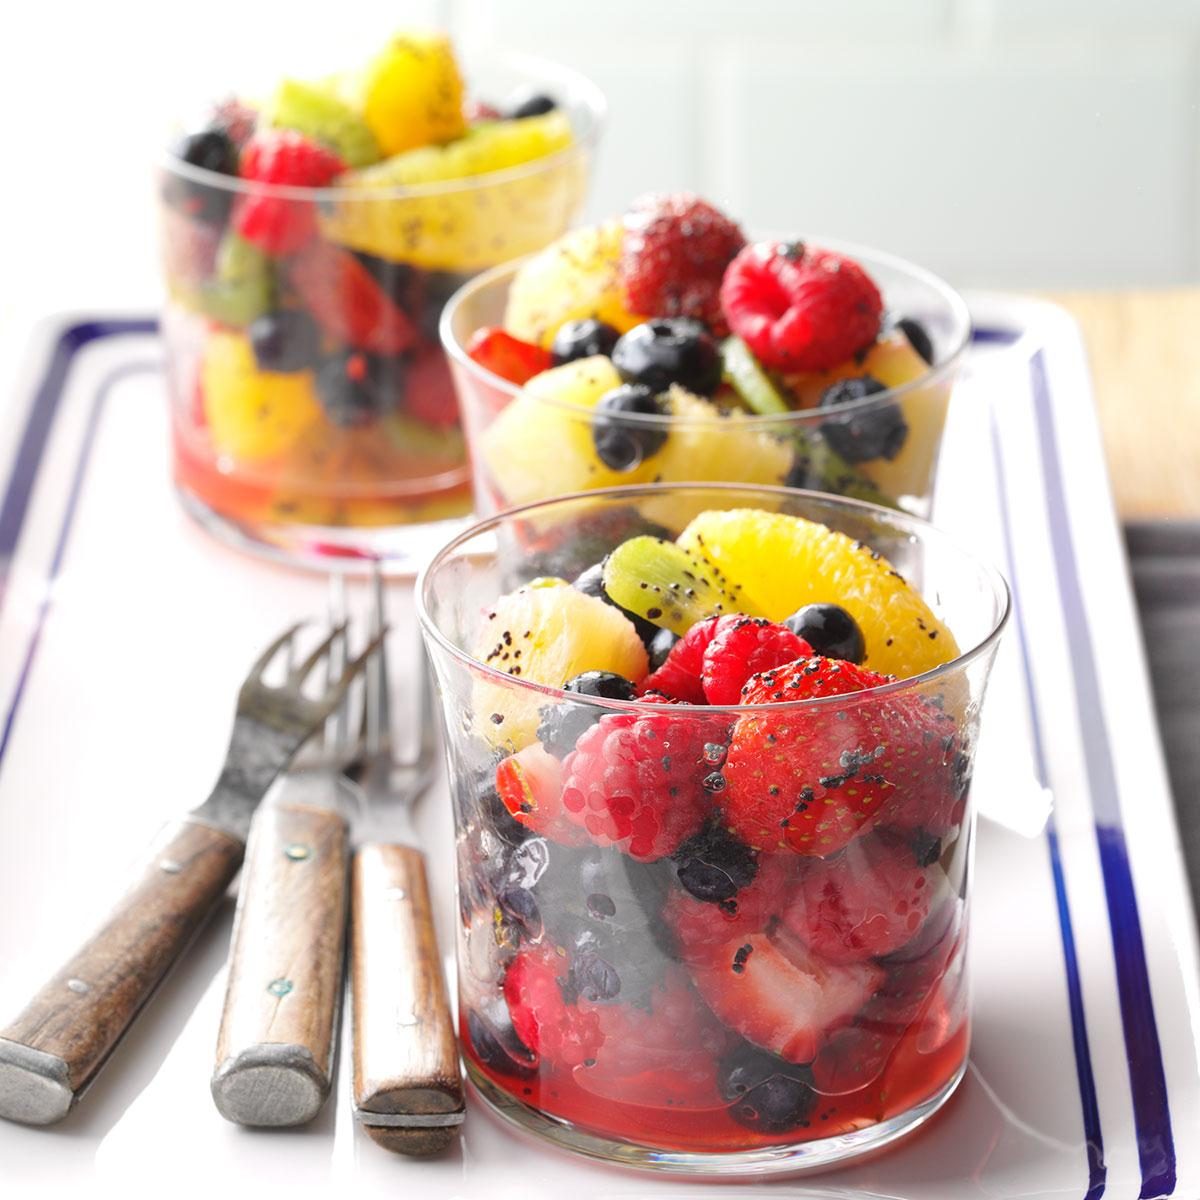 40 Stunning Fruit Salad Recipes to Make Any Time of Year